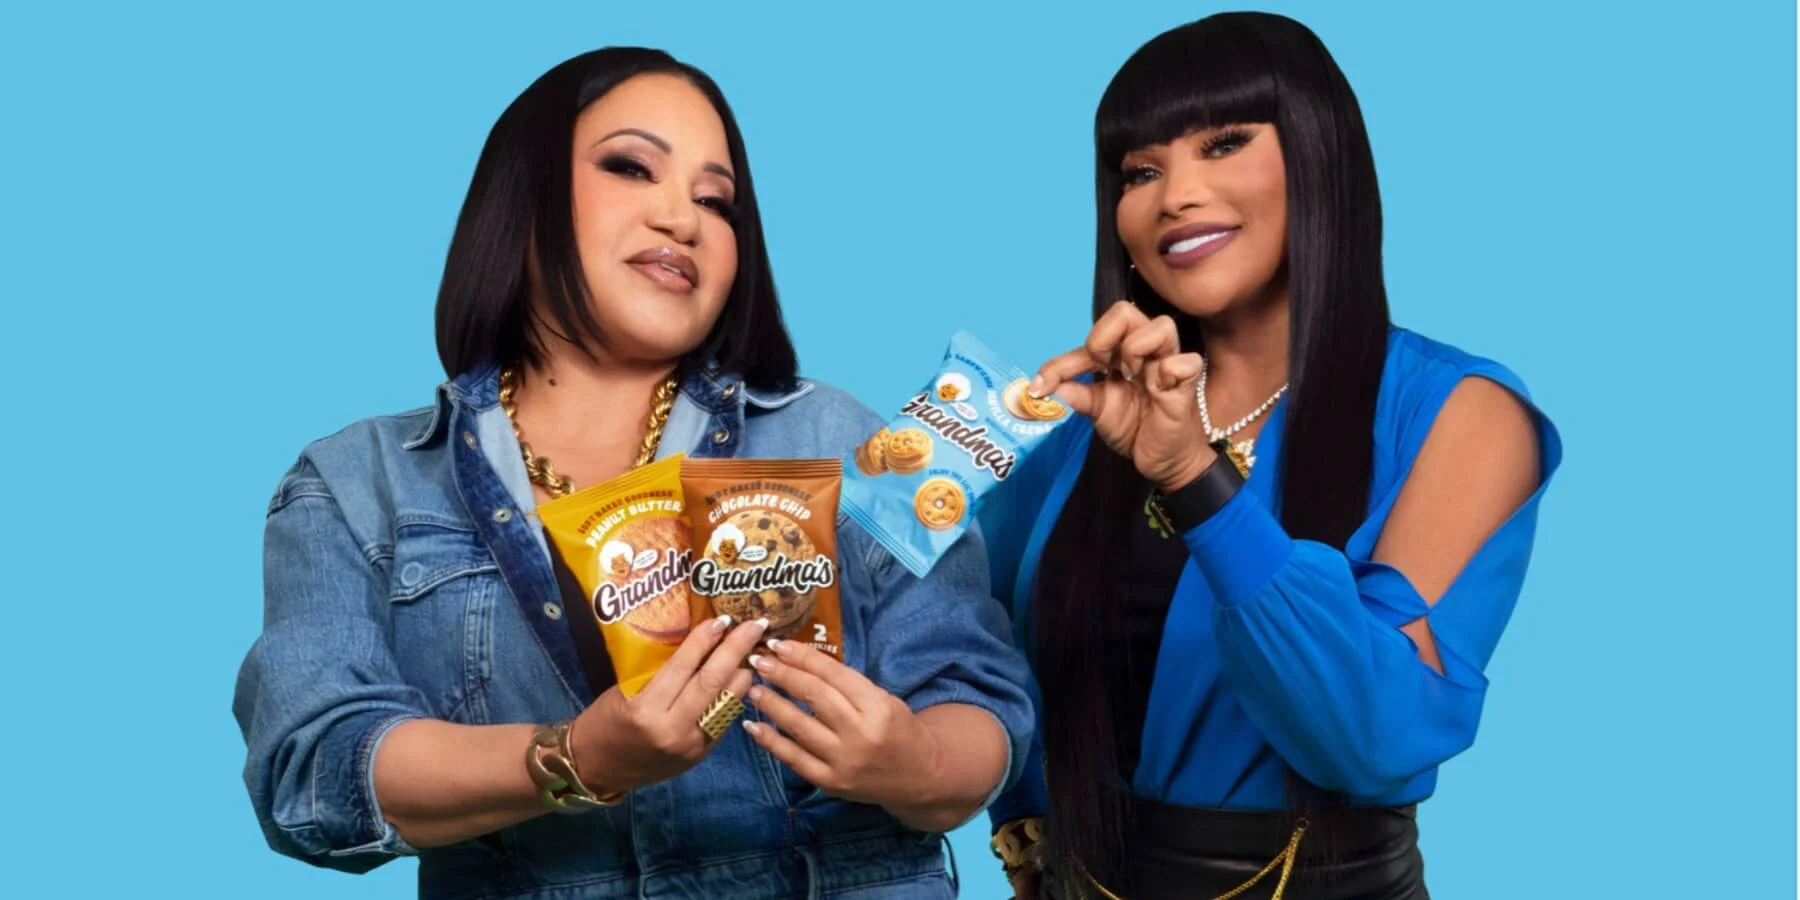 Salt-N-Pepa On Debuting A Remix With Grandma's Cookies And The New Generation Of Grandmothers